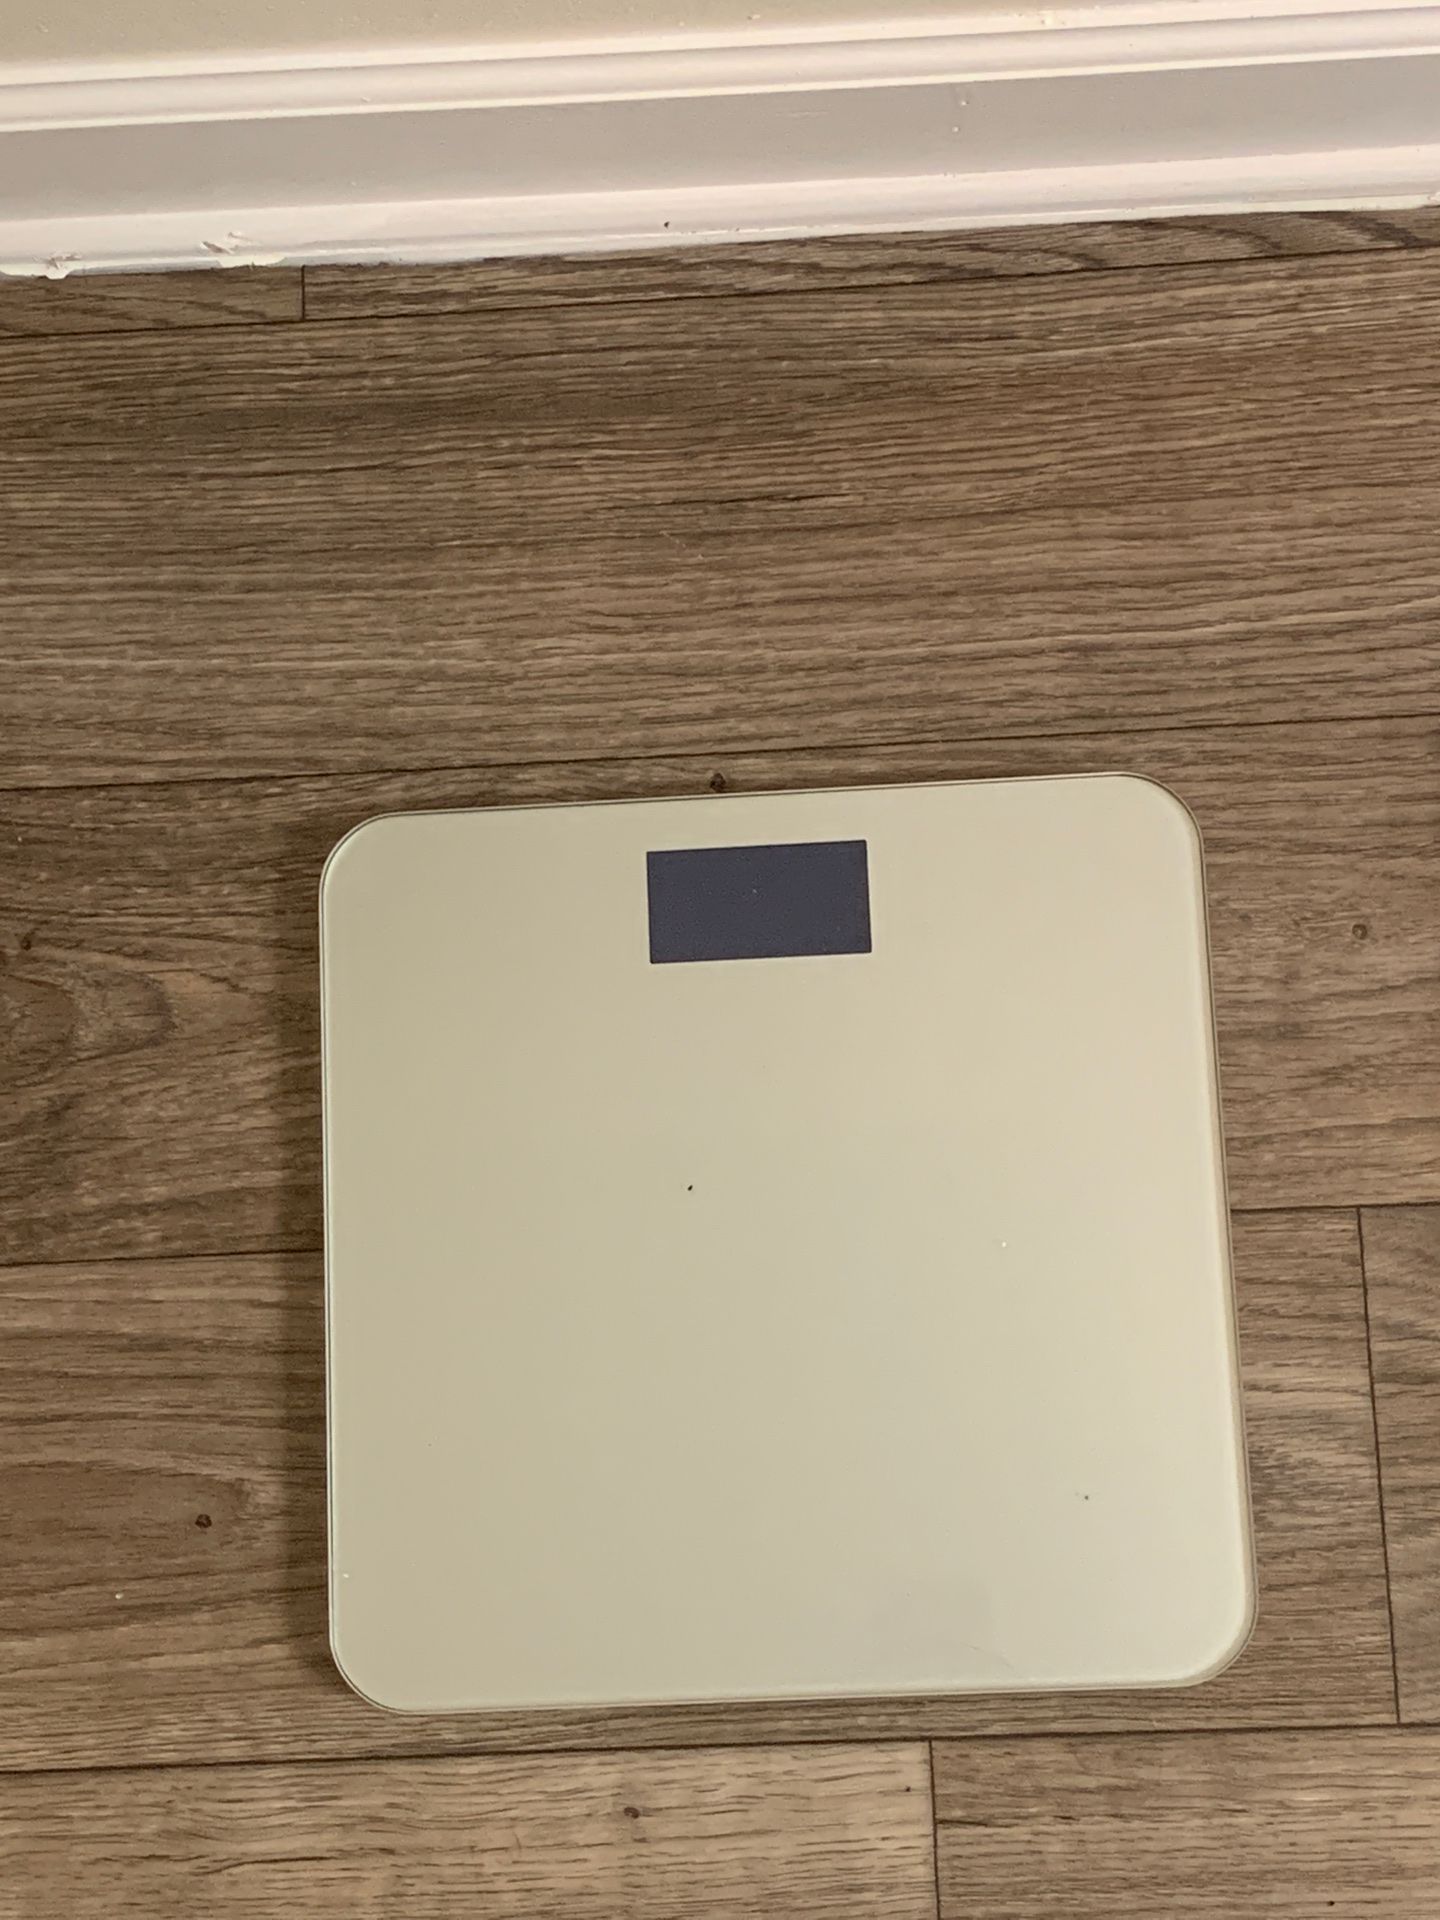 Digital weight scale